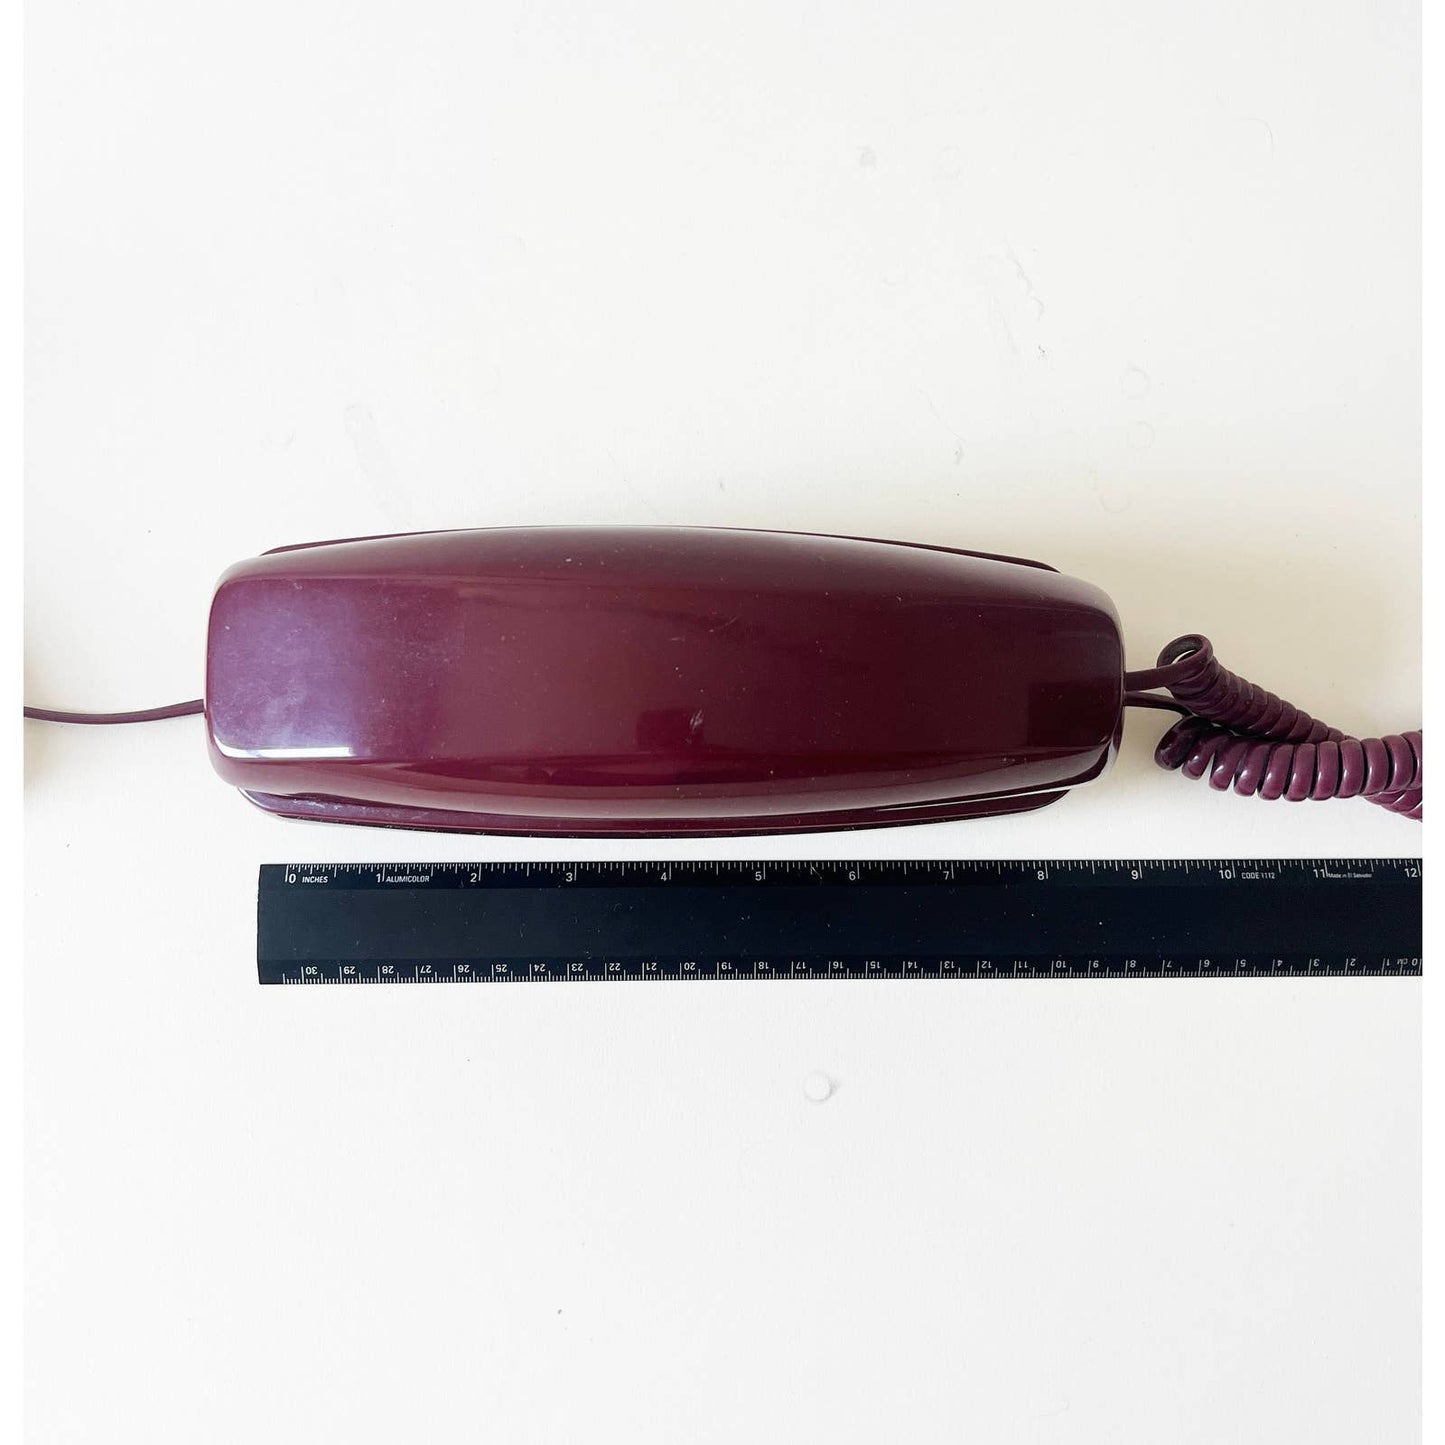 Vintage 90's Trimline Phone Touch Tone Burgundy Working, Retro 90s Land Line Backlit Push Button Phone